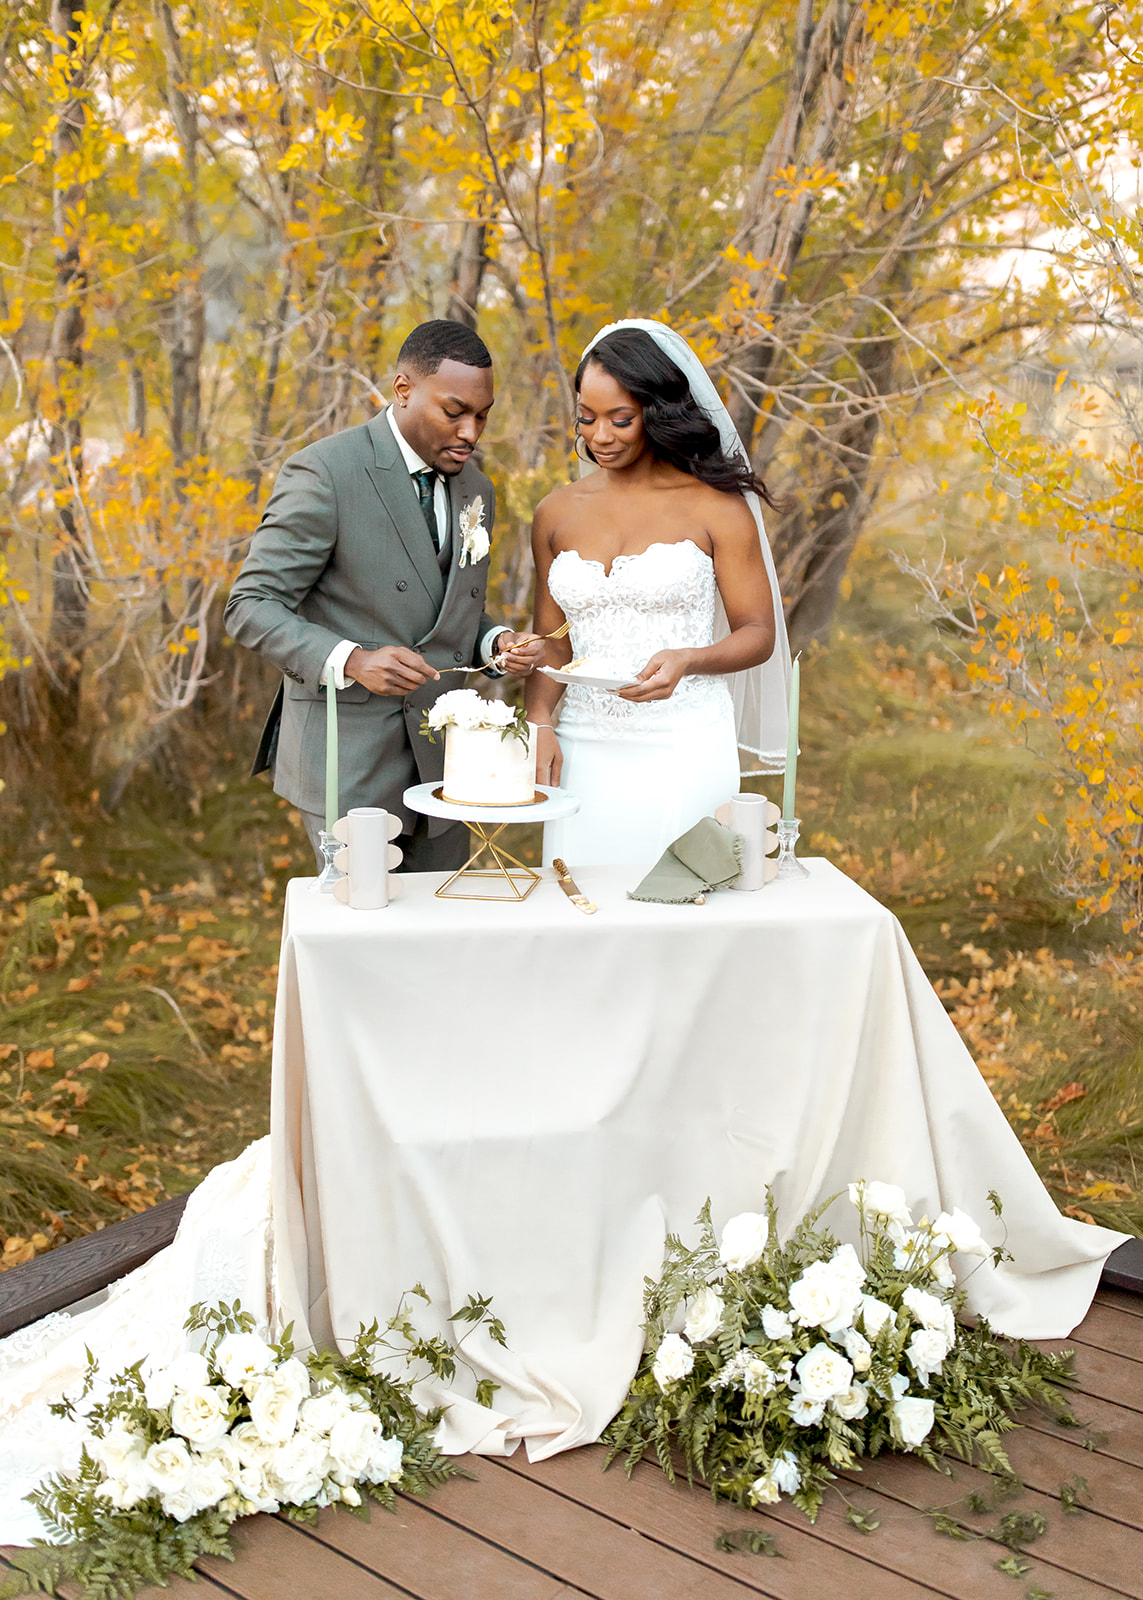 Couple cutting cake with yellow fall leaves behind them 